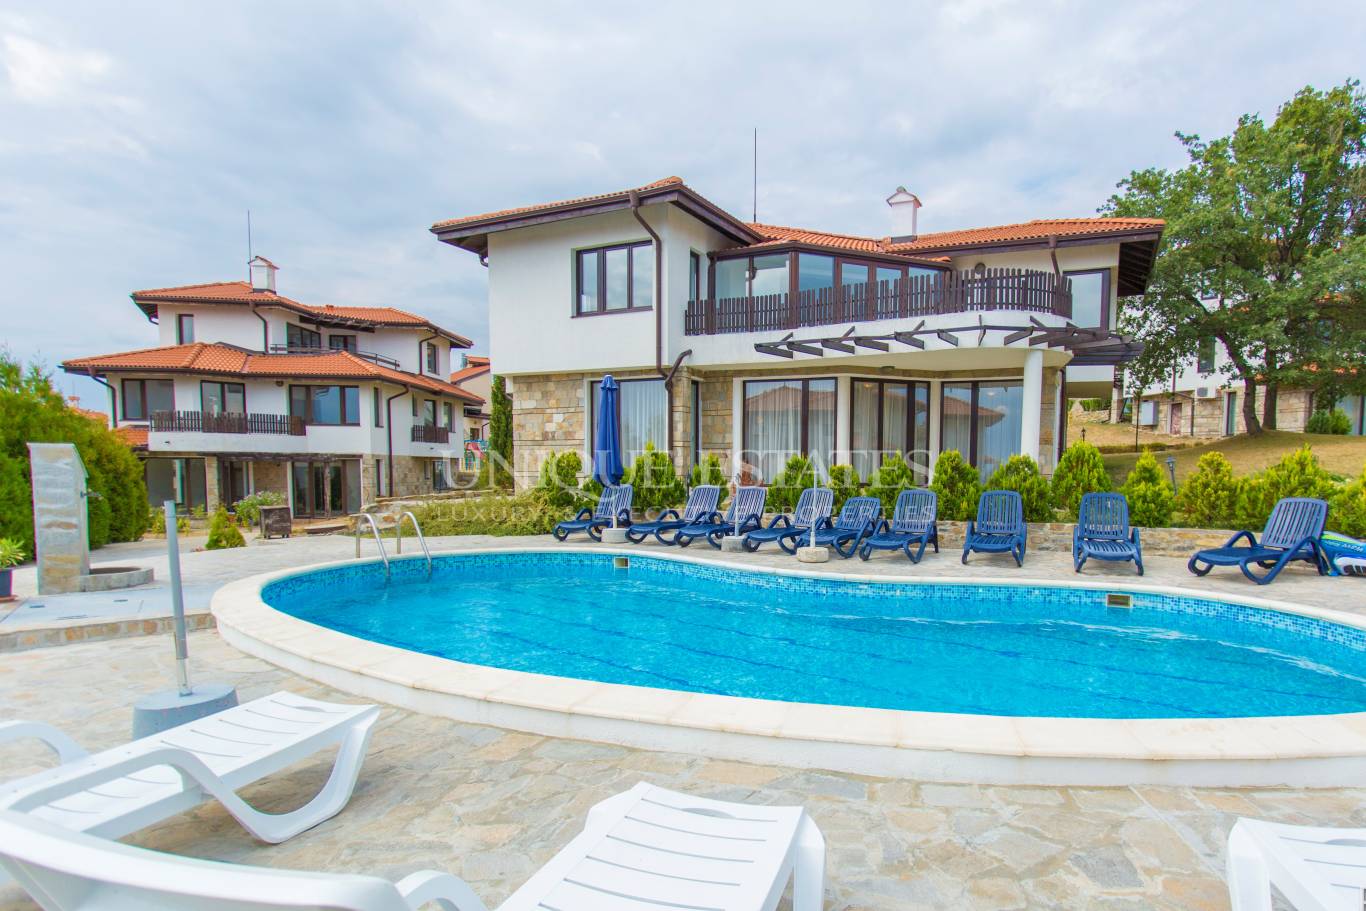 House for sale in Nesebar,  with listing ID: K9933 - image 1